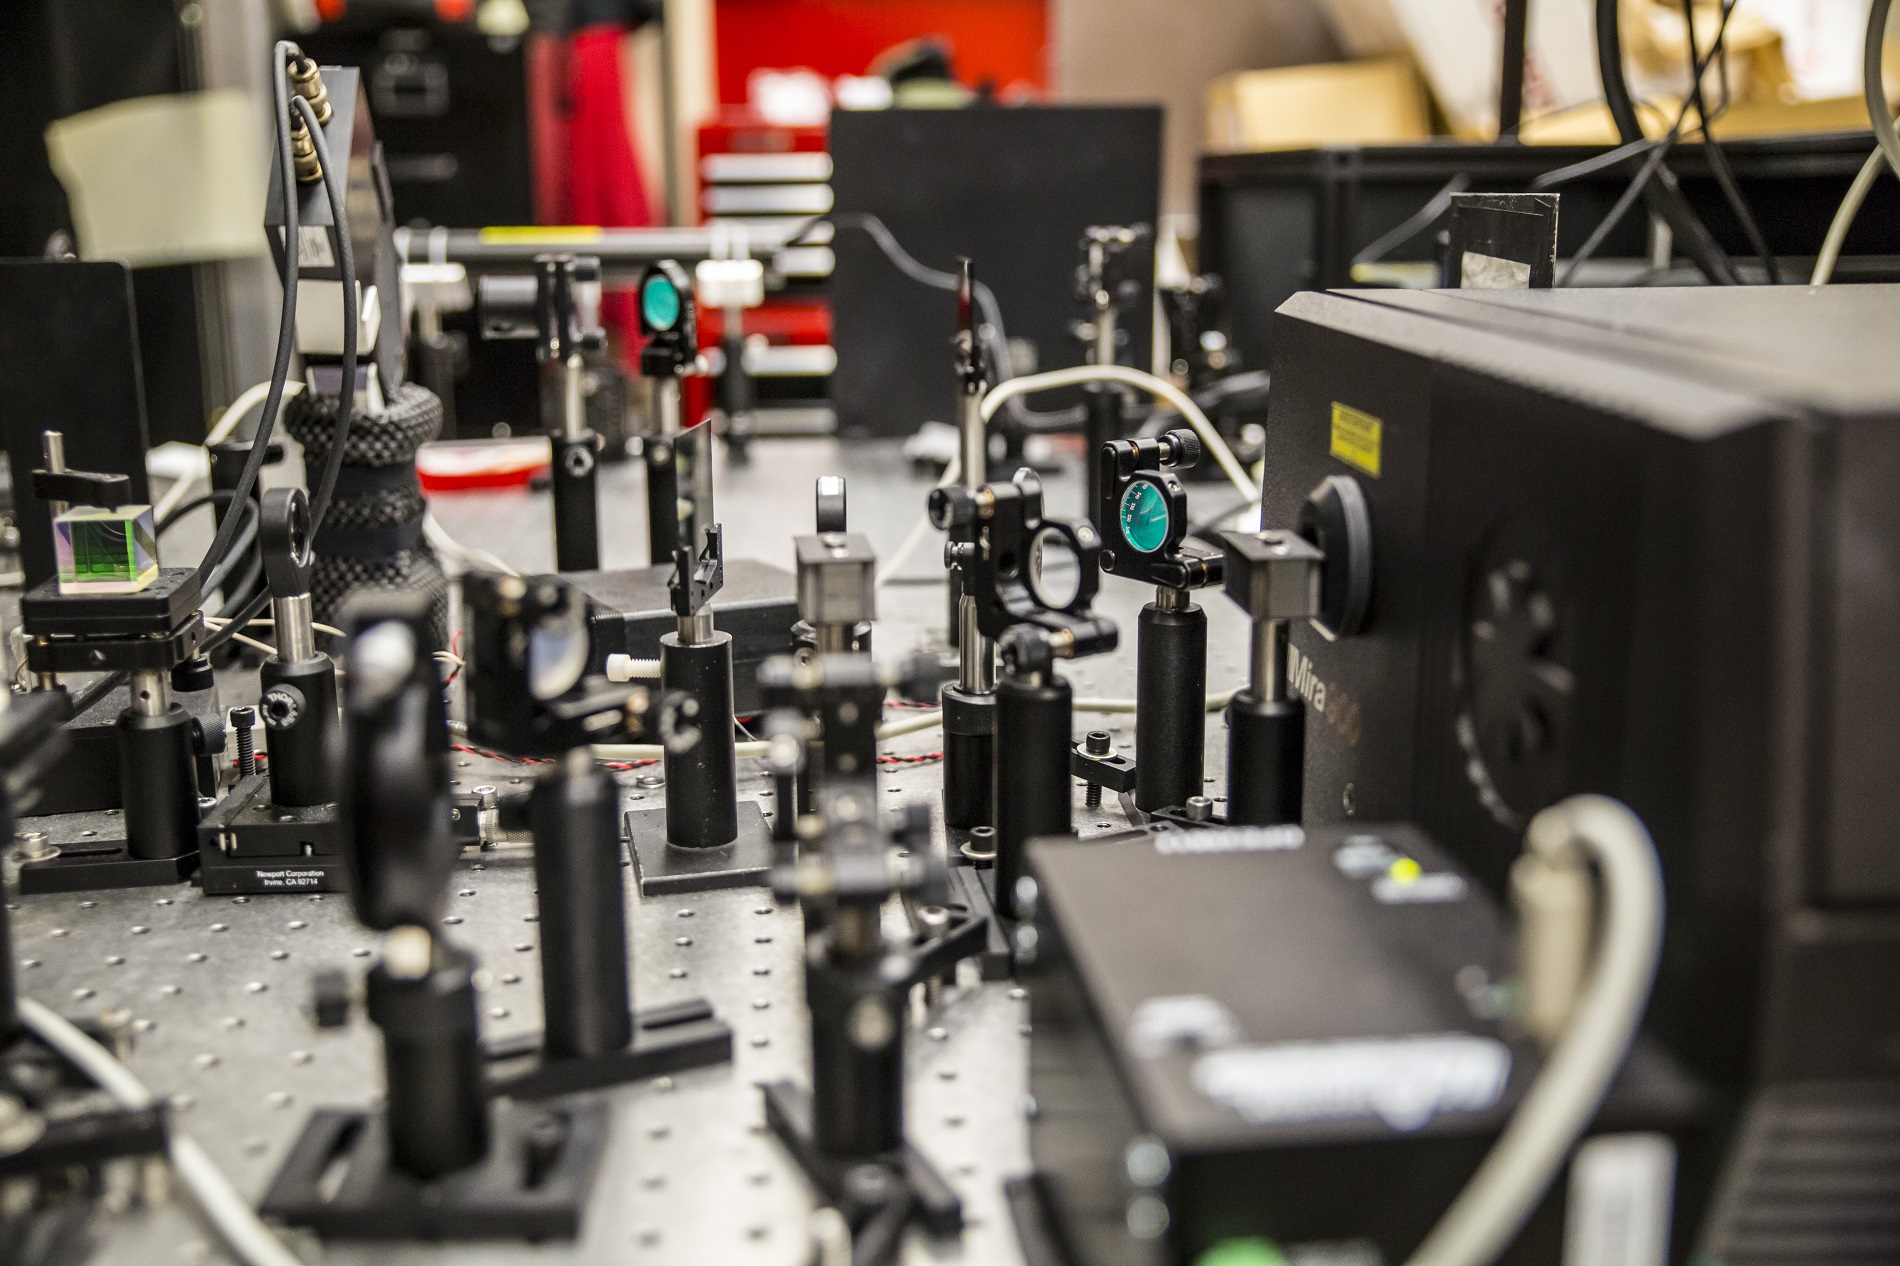 The ultrafast laser shoots very short light pulses 80 million times a second at the hybrid perovskite material to determine whether its electrons could be used to carry information in future devices